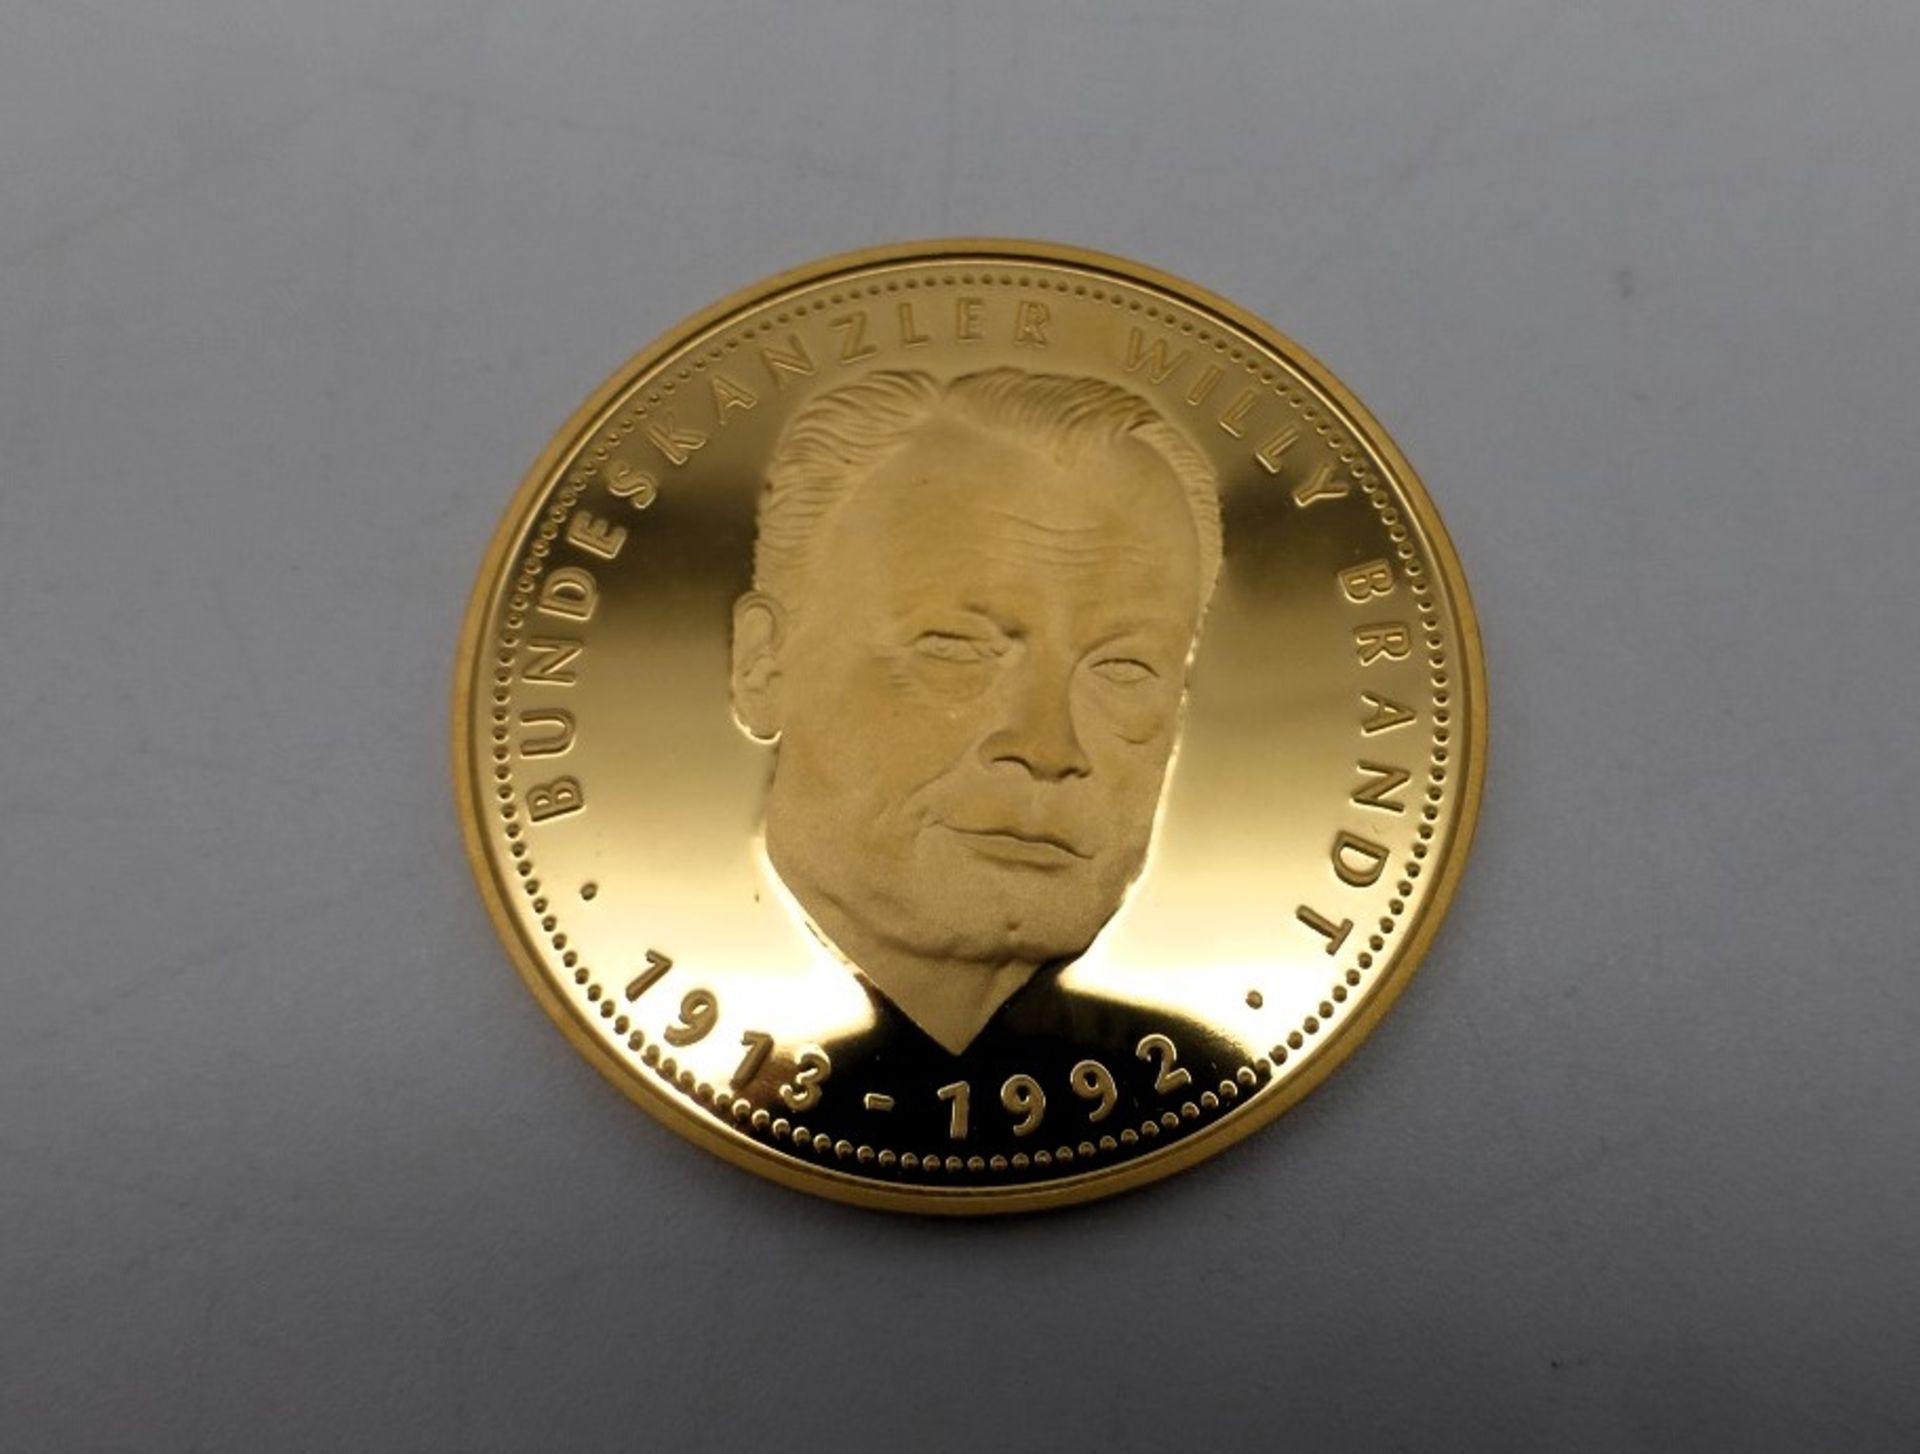 Goldmedaille "Willy Brandt" / 1992